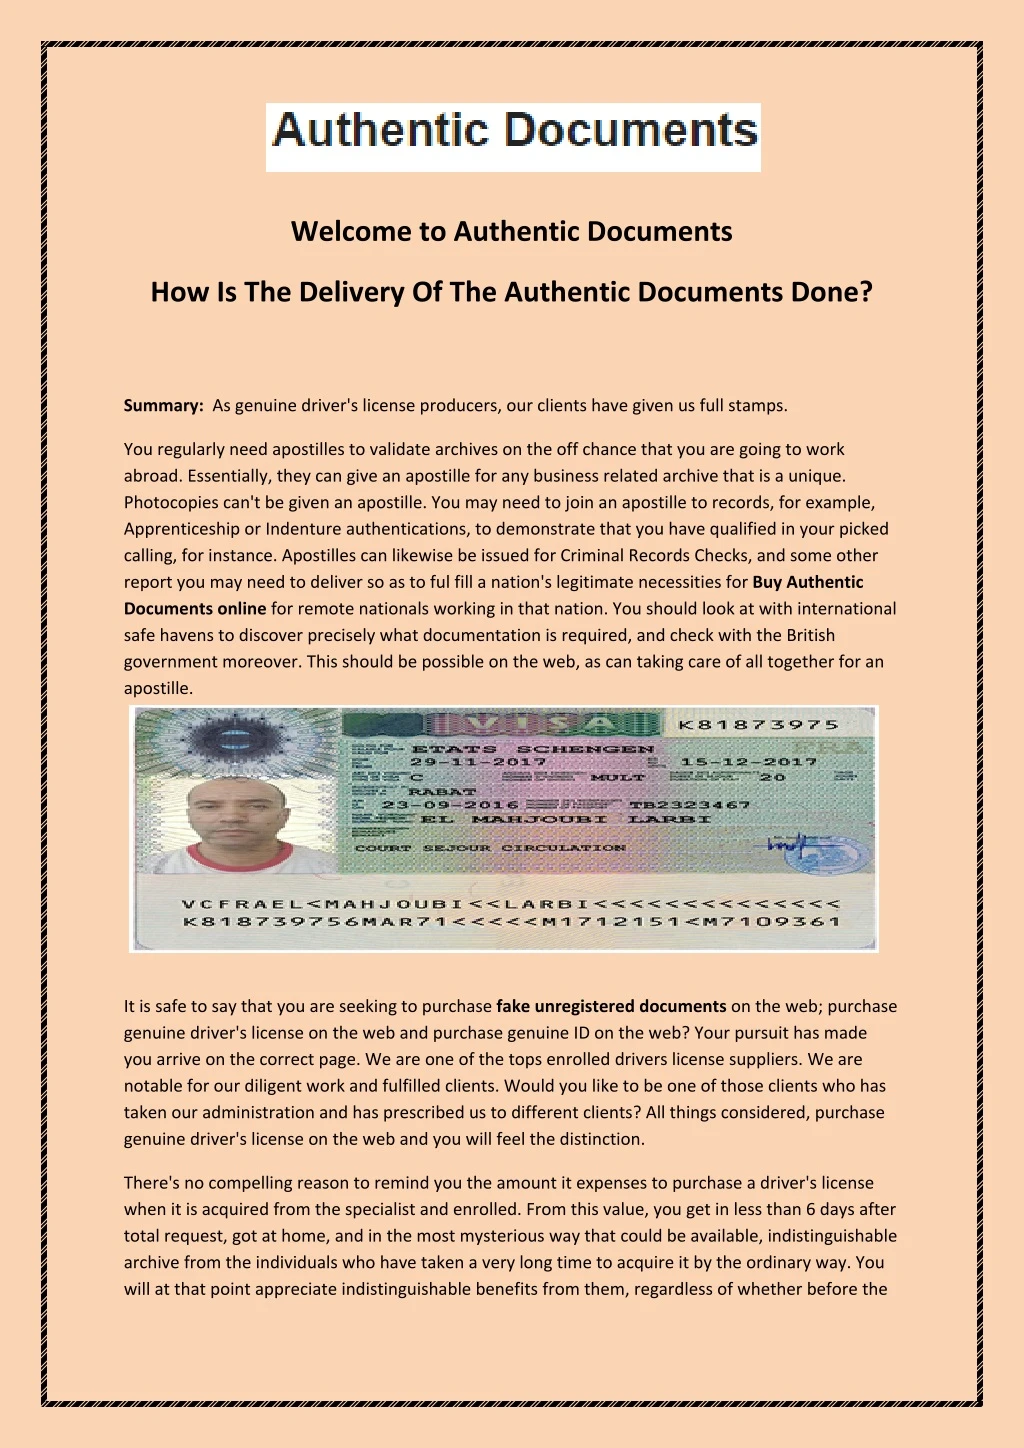 welcome to authentic documents